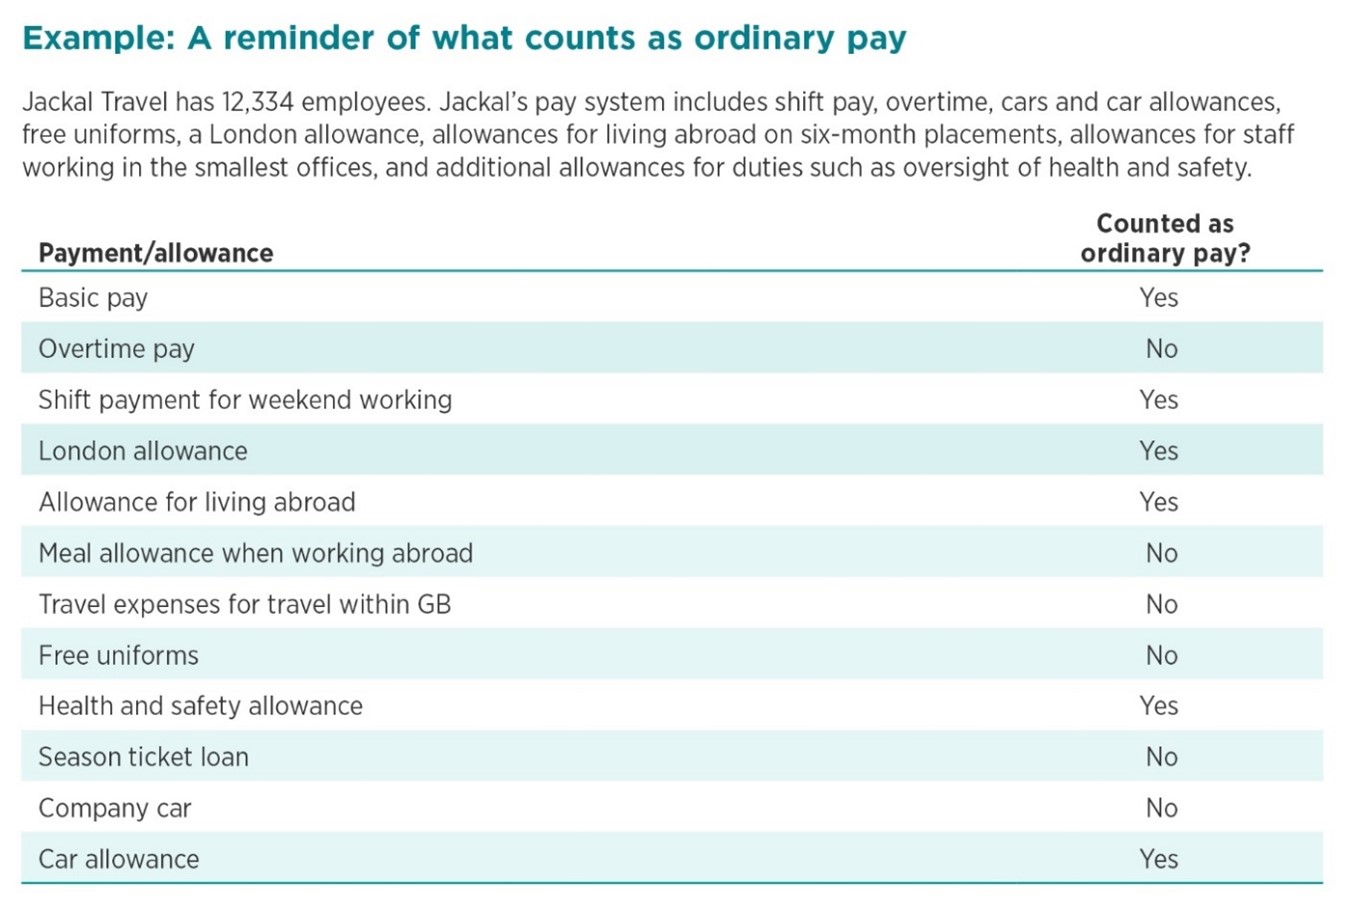 A reminder of what counts as ordinary pay